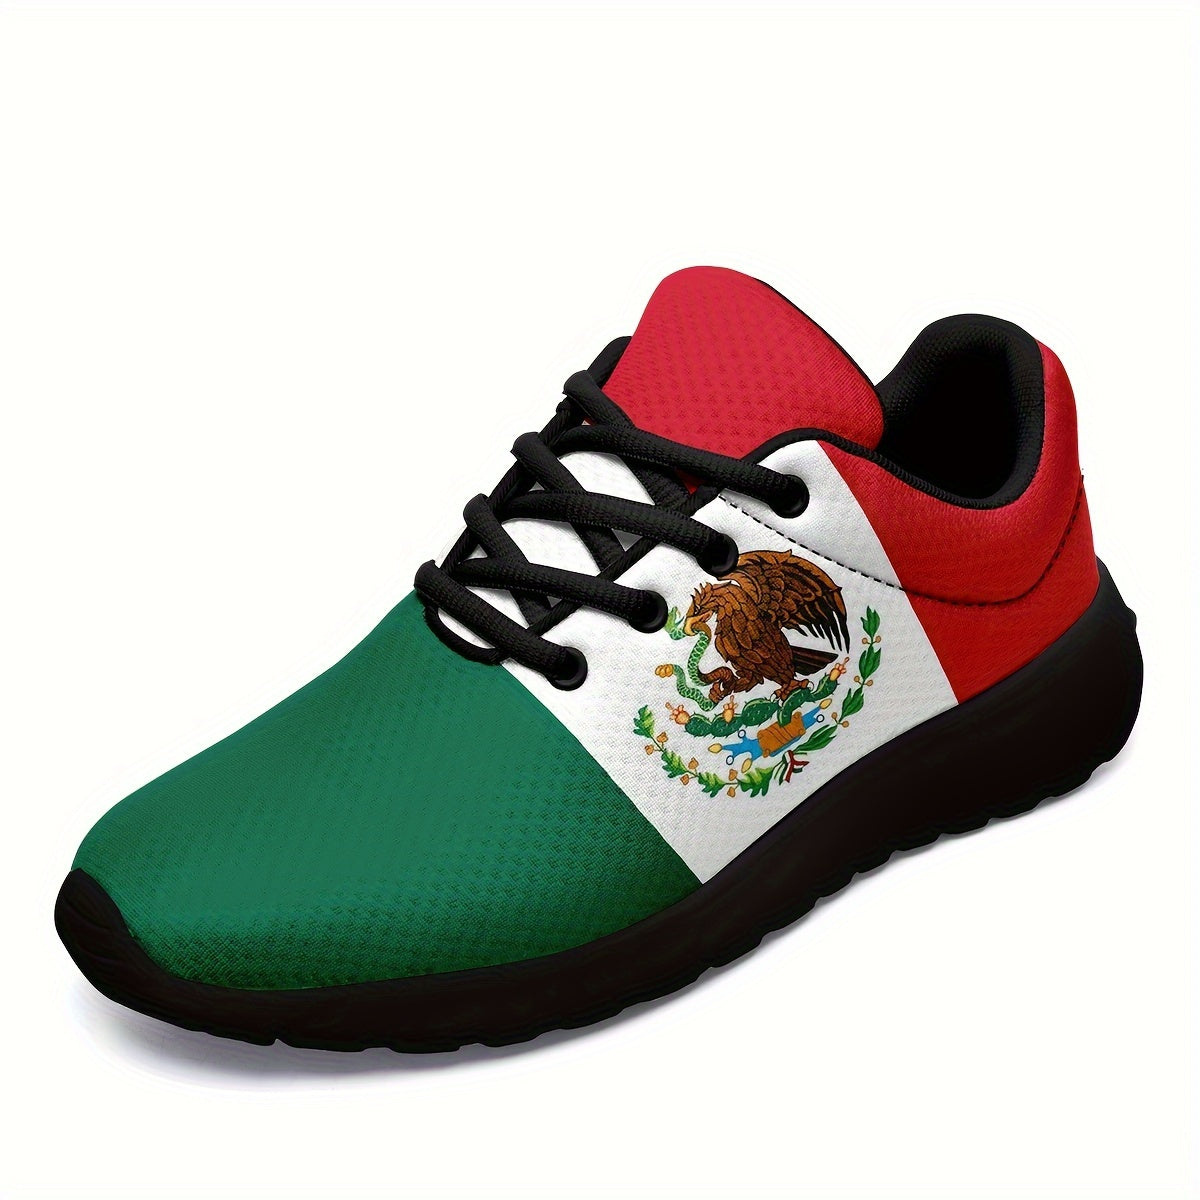 Plus Size Men's Trendy Mexico National Flag Pattern Sneakers, Comfy Non Slip Casual Soft Sole Lace Up Shoes For Men's Outdoor Activities